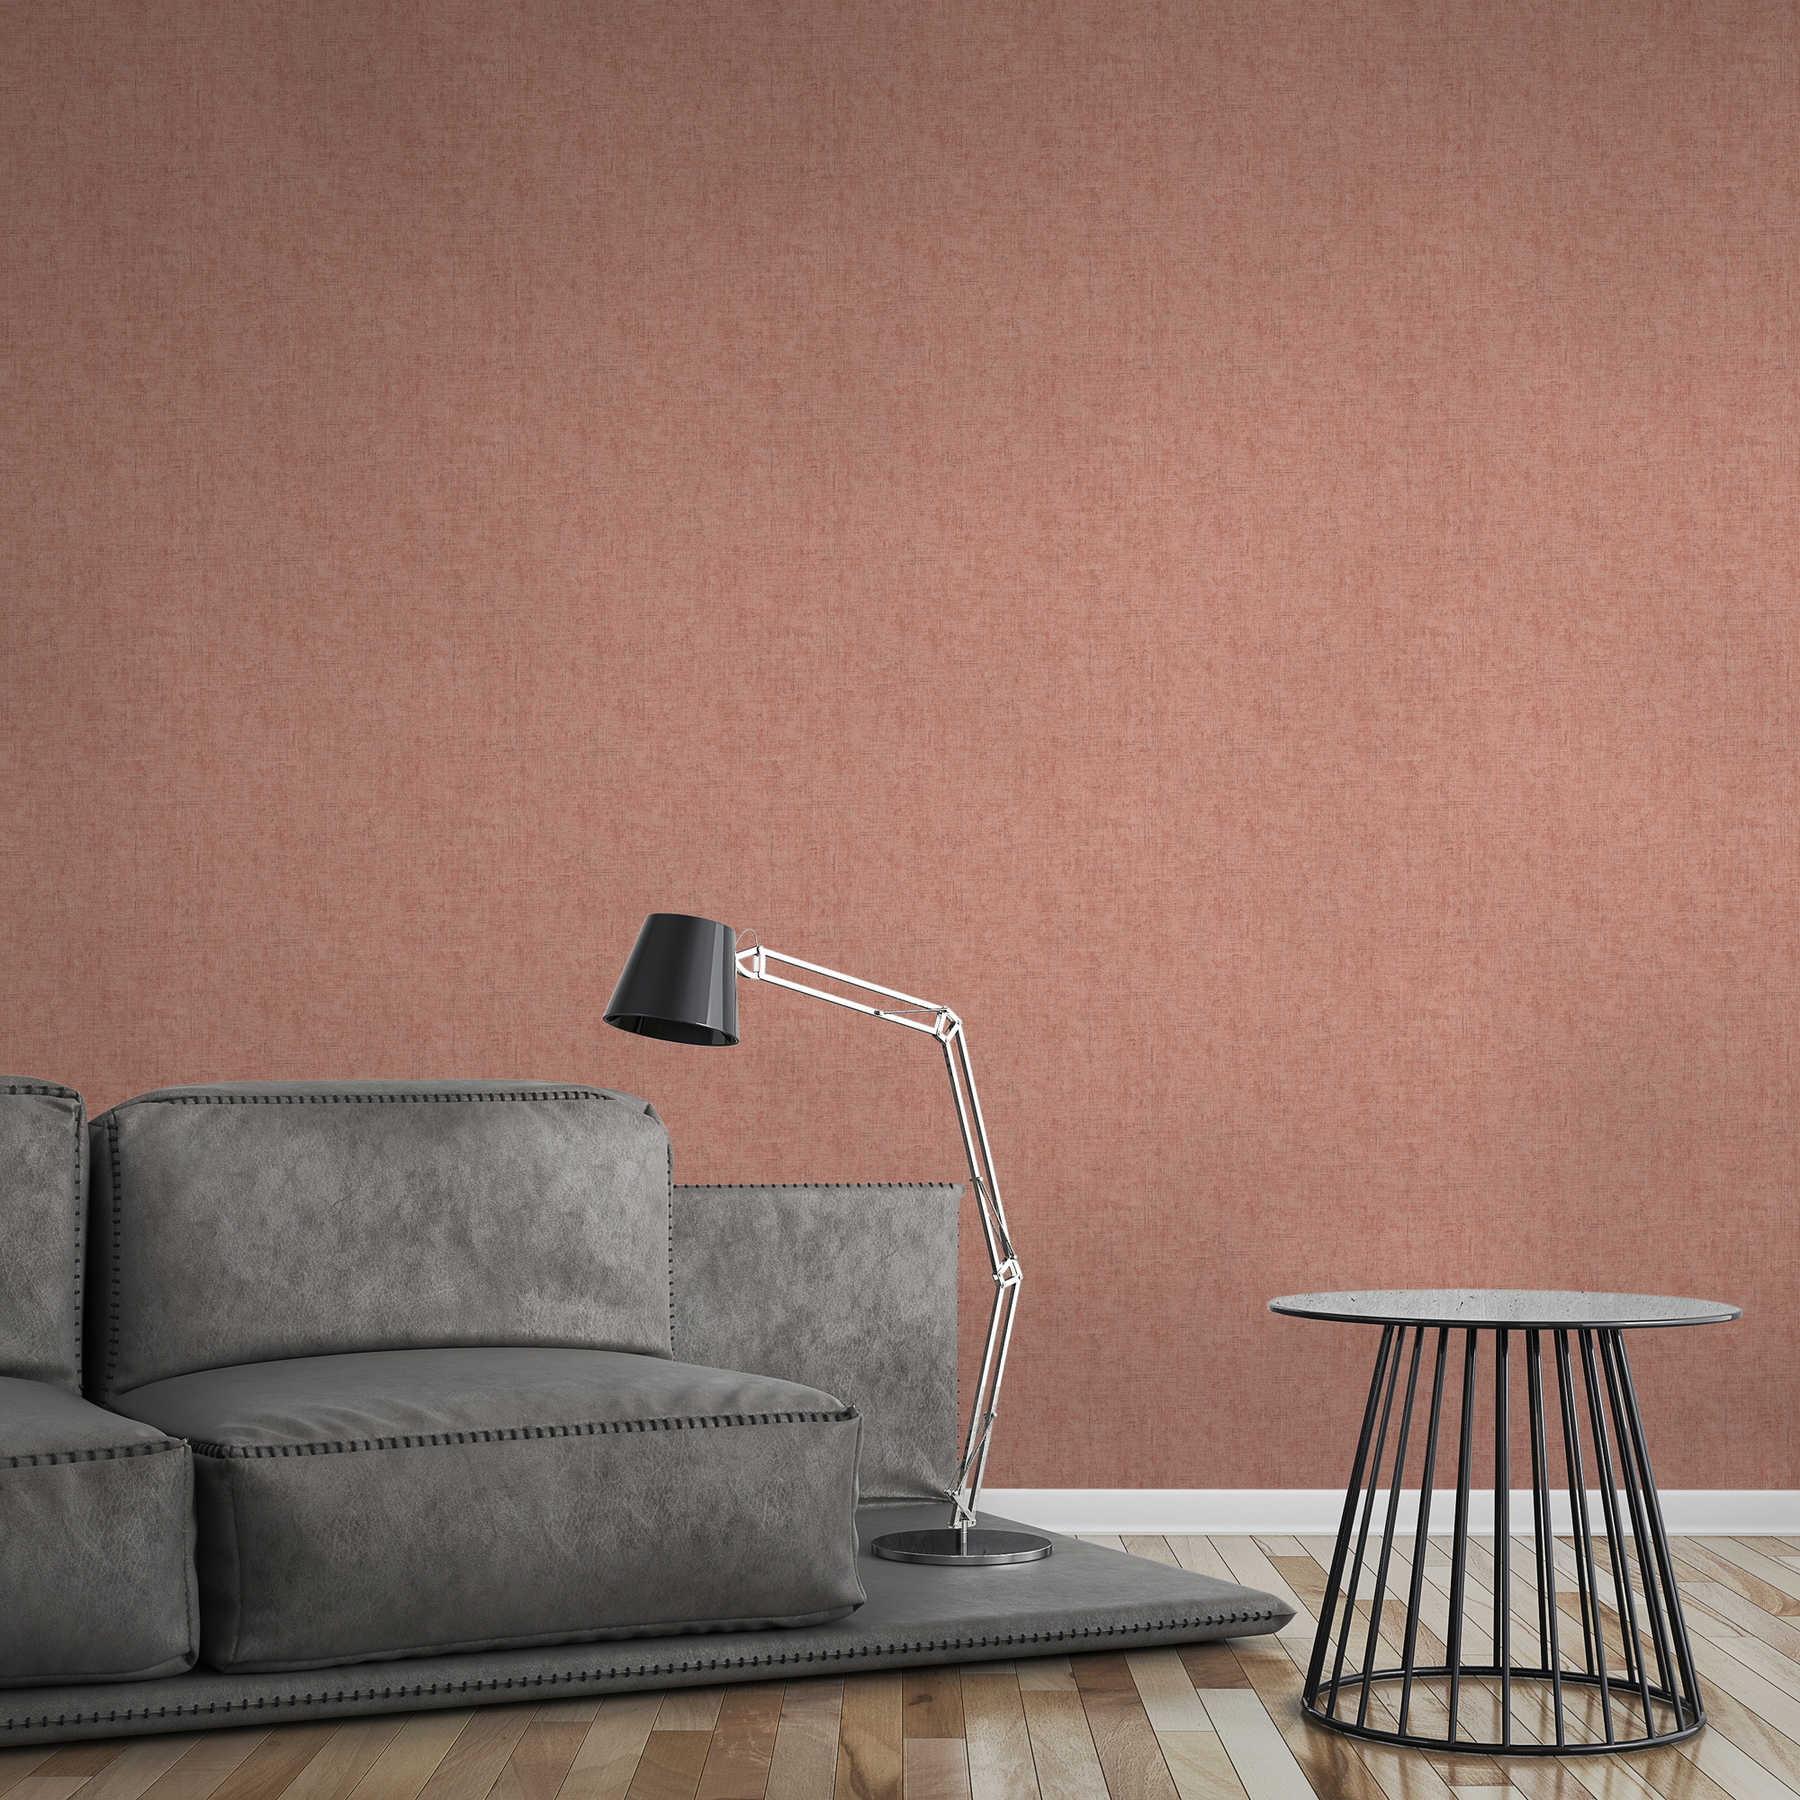             Non-woven wallpaper pink grey mottled with colour hatching & embossed texture
        